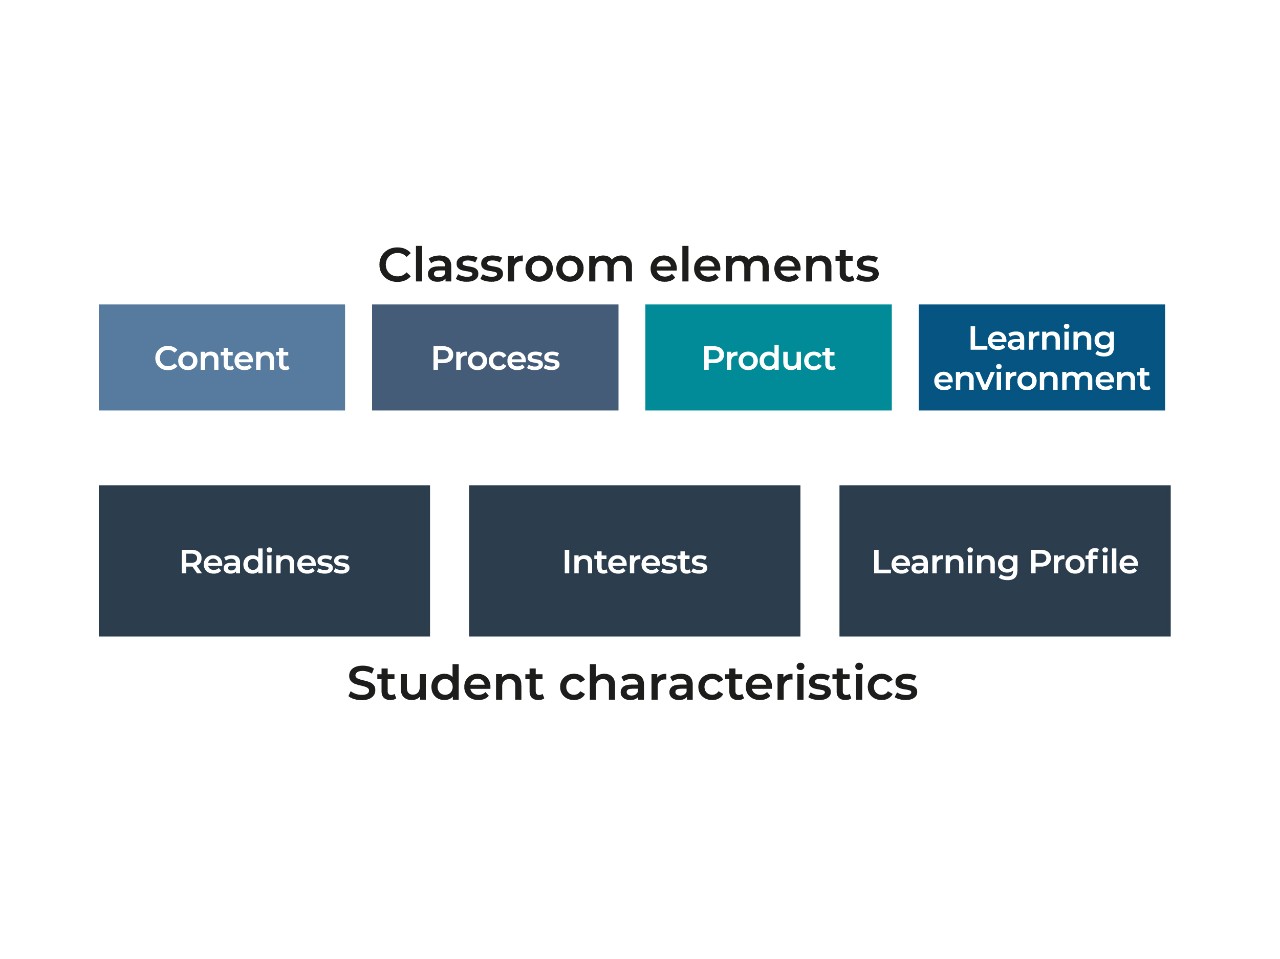 Differentiating classroom elements and student characteristics